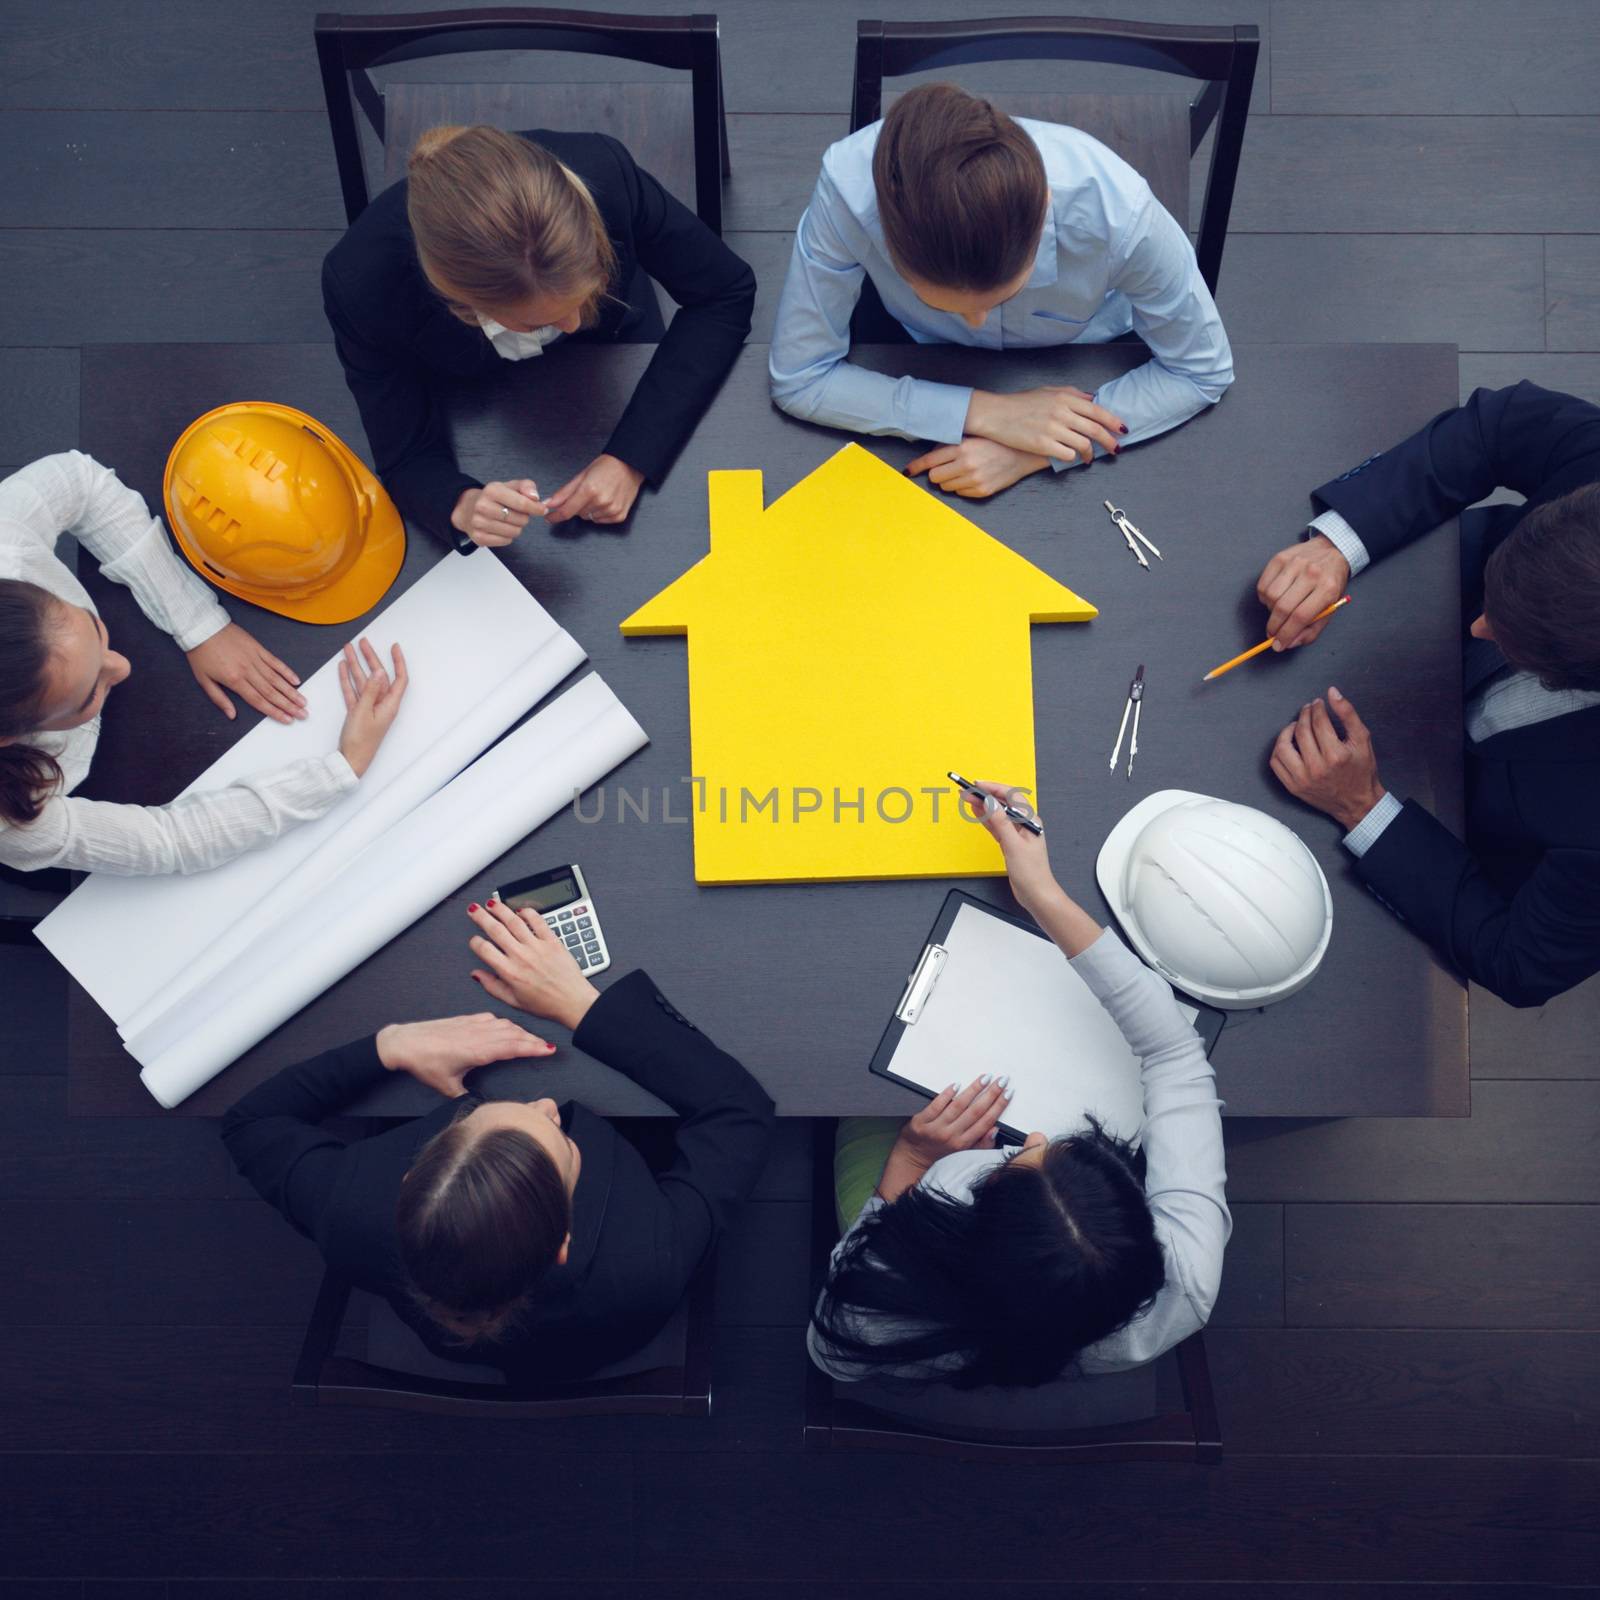 Top view of people around table in construction business meeting